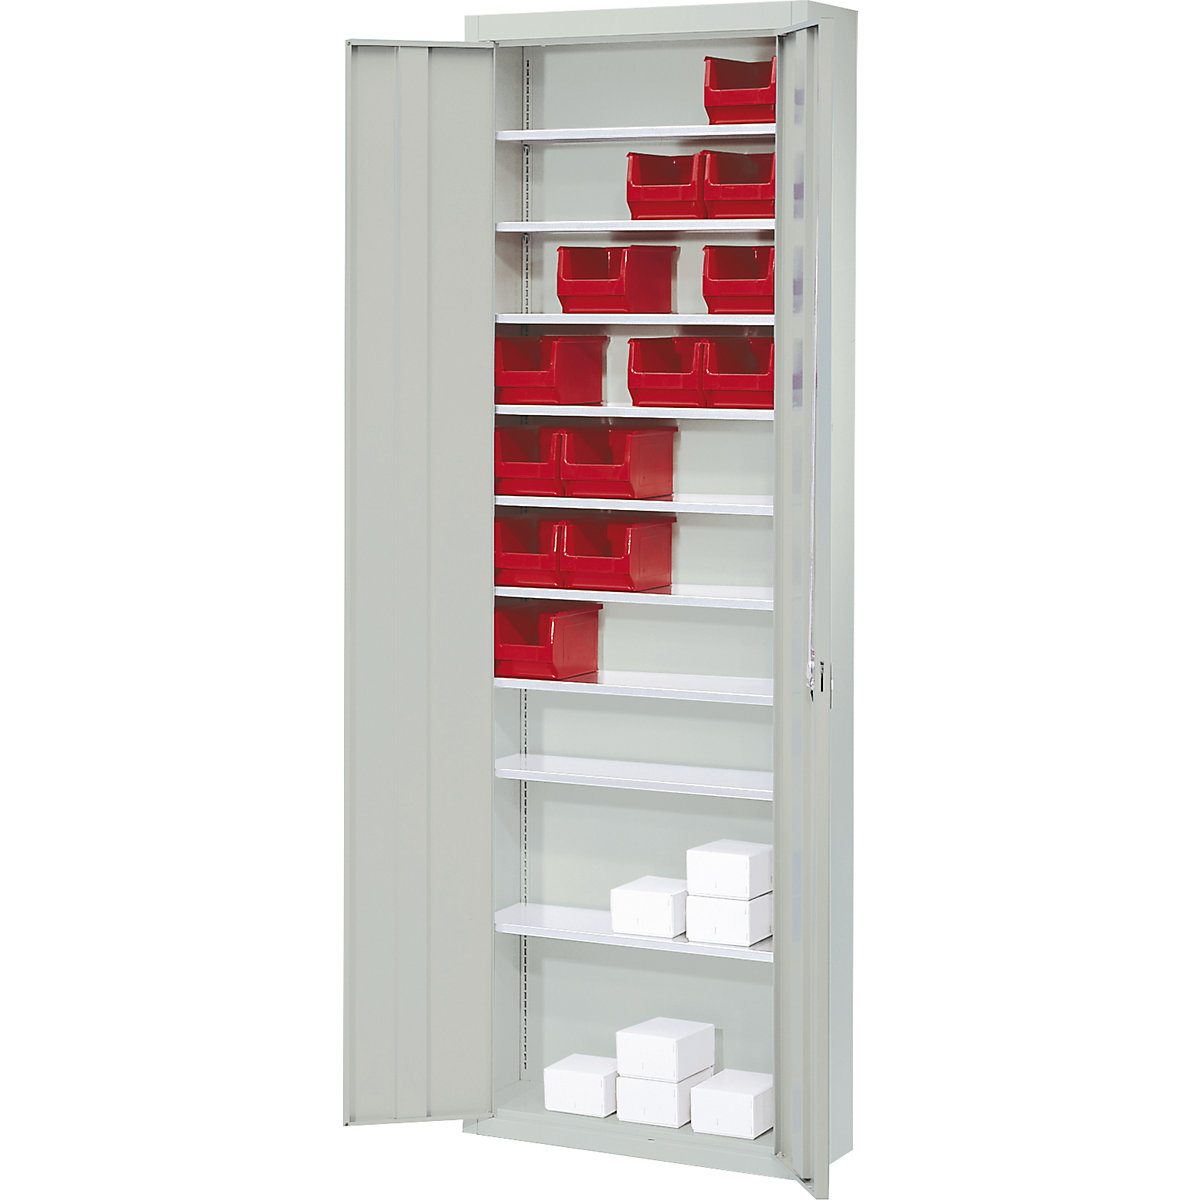 Storage cupboard, without open fronted storage bins – mauser, HxWxD 2150 x 680 x 280 mm, single colour, grey-4